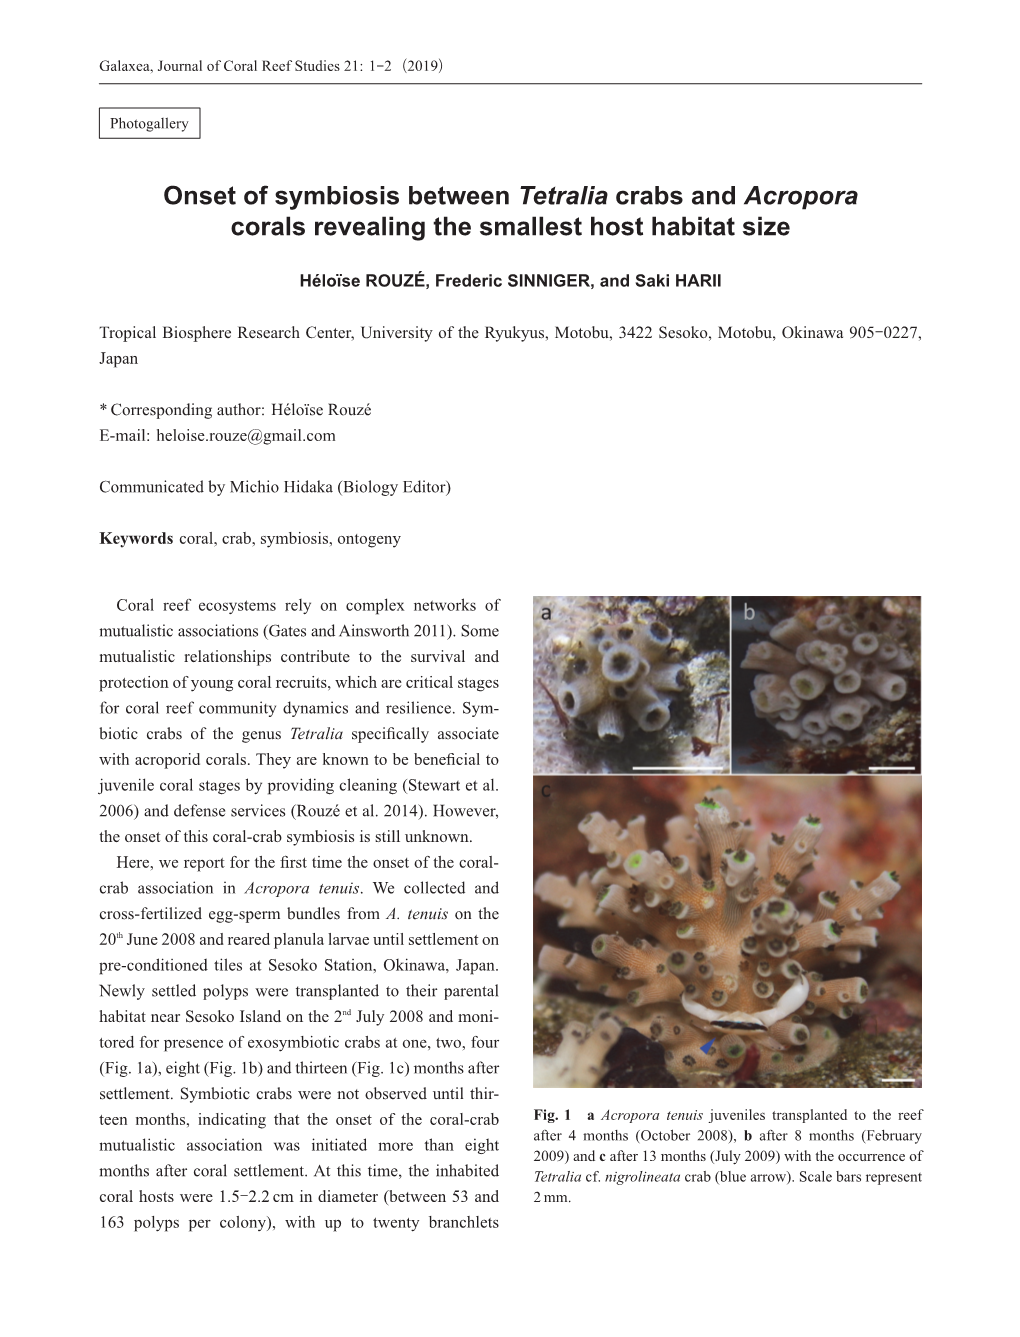 Onset of Symbiosis Between Tetralia Crabs and Acropora Corals Revealing the Smallest Host Habitat Size